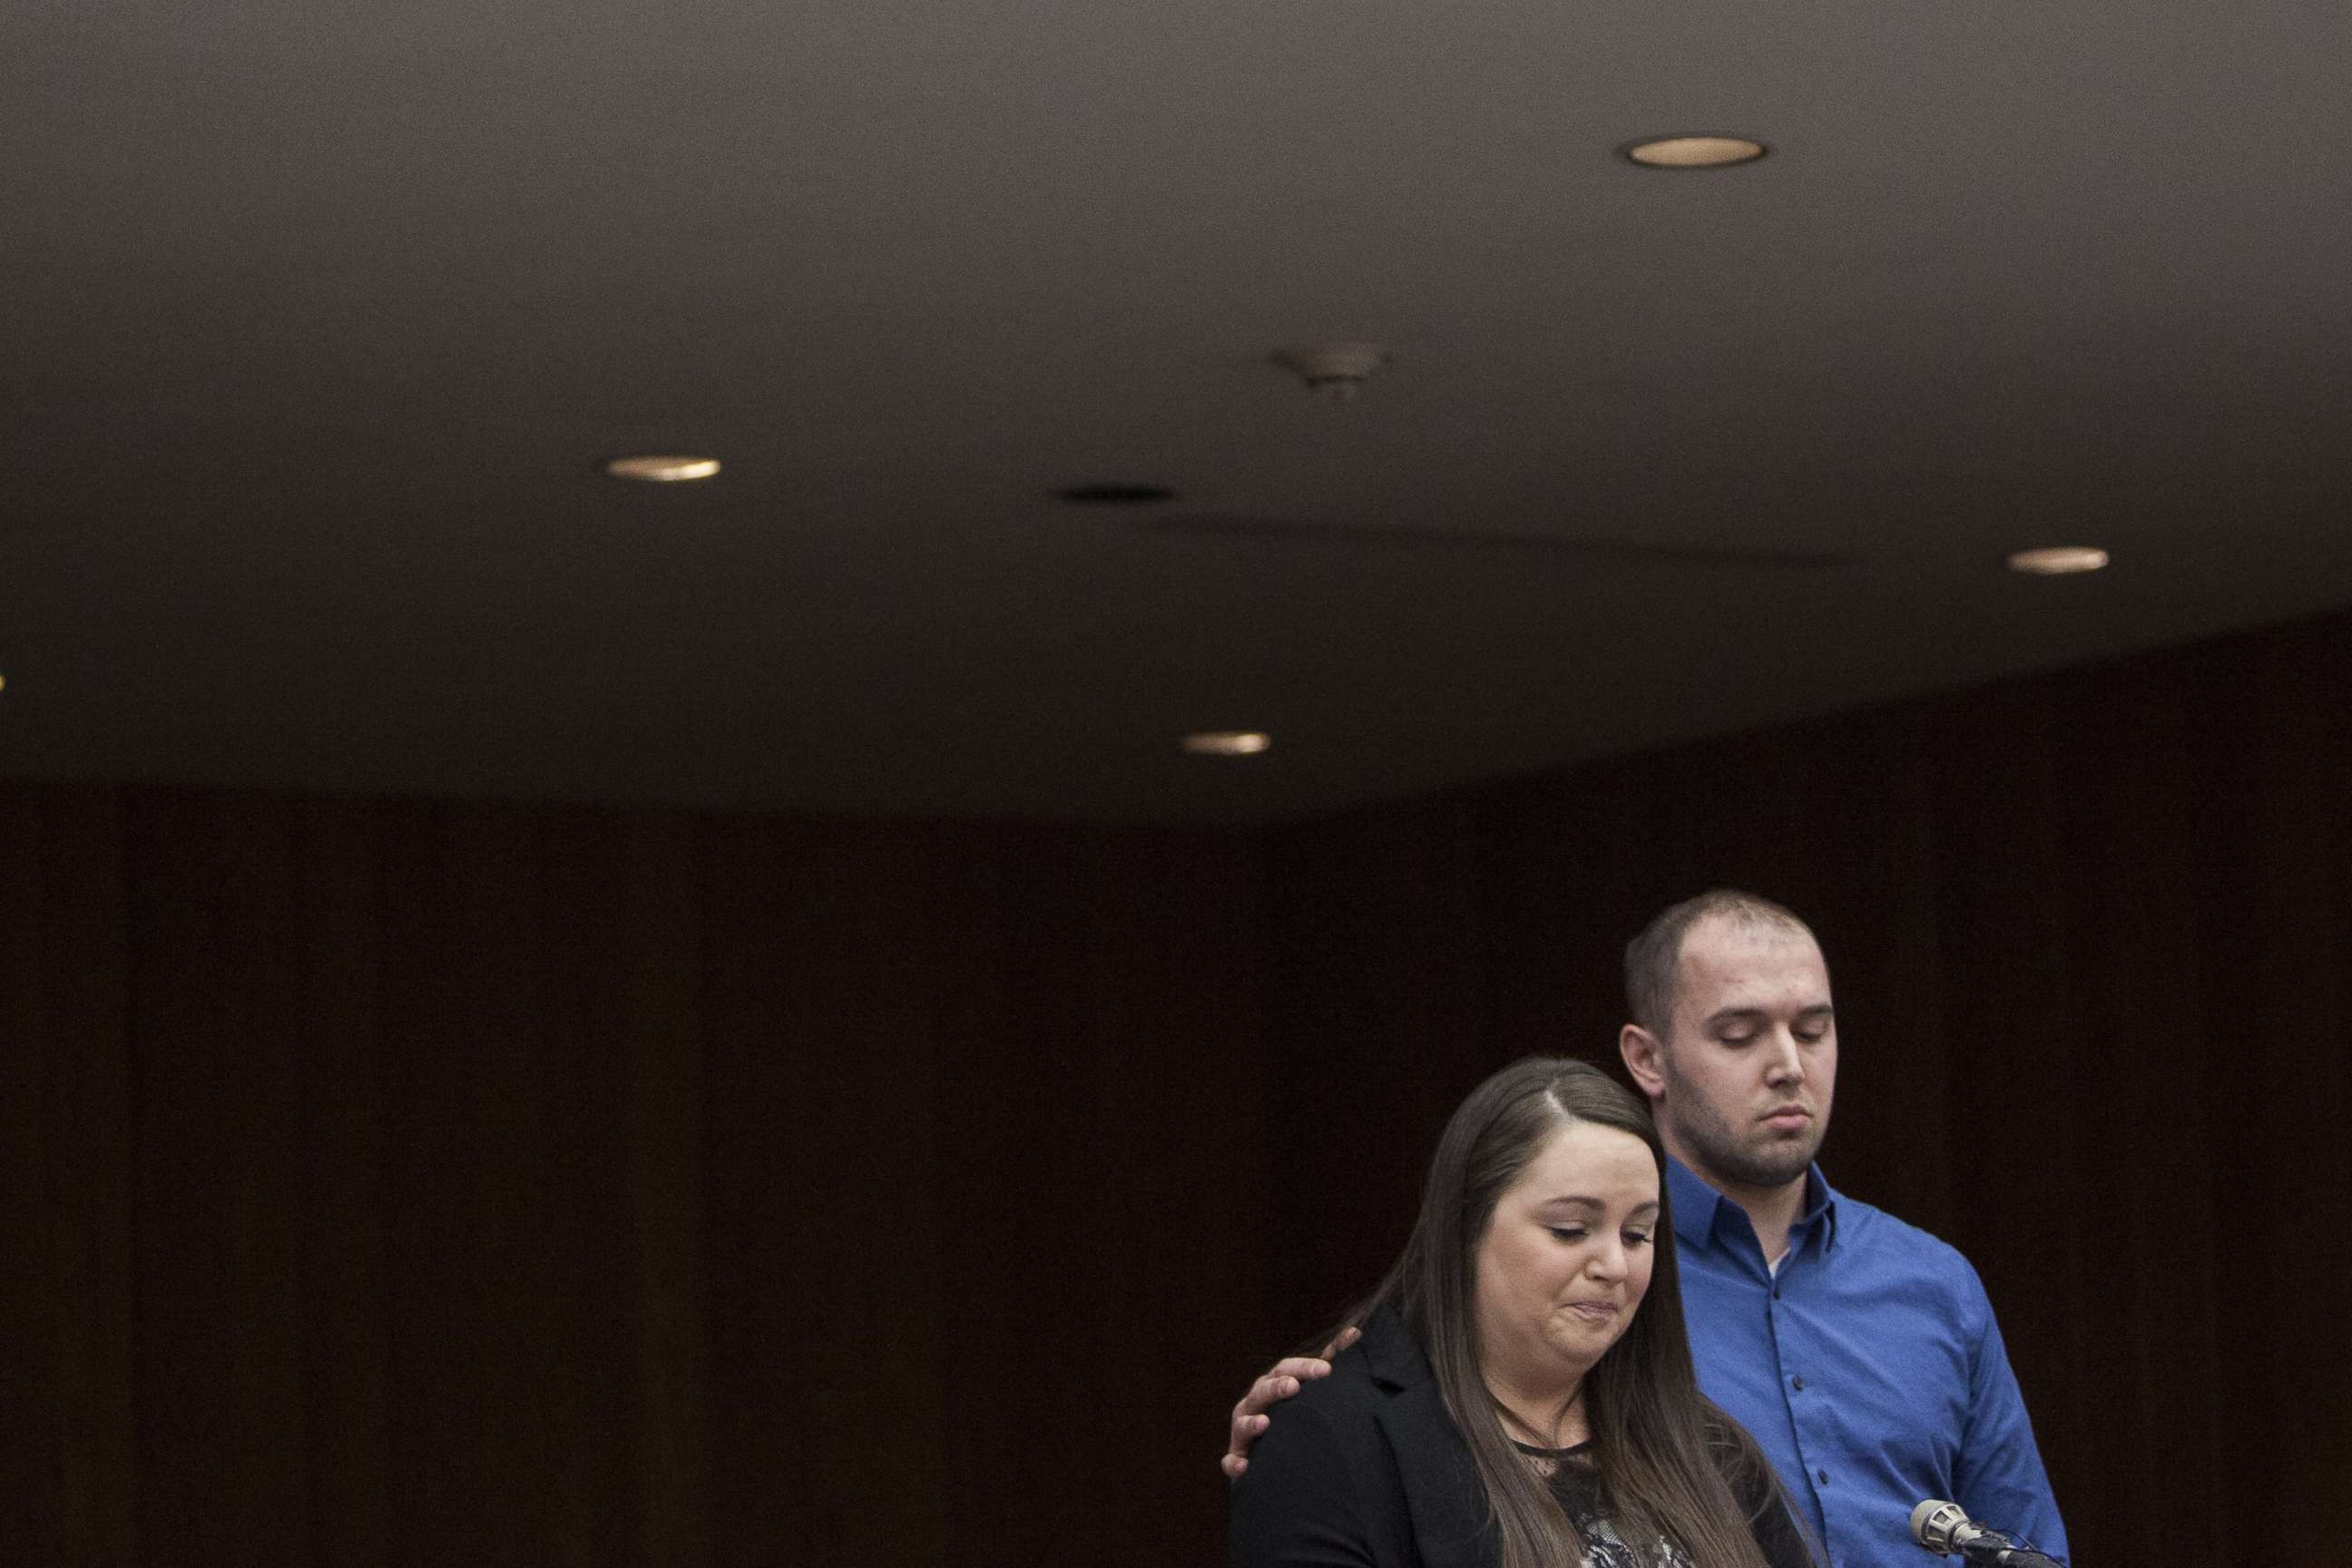 PHOTO: Tiffany Dutton gives her statement, near her husband, Chad, during Larry Nassar's sentencing at Eaton County Circuit Court in Charlotte, Jan. 31, 2018.